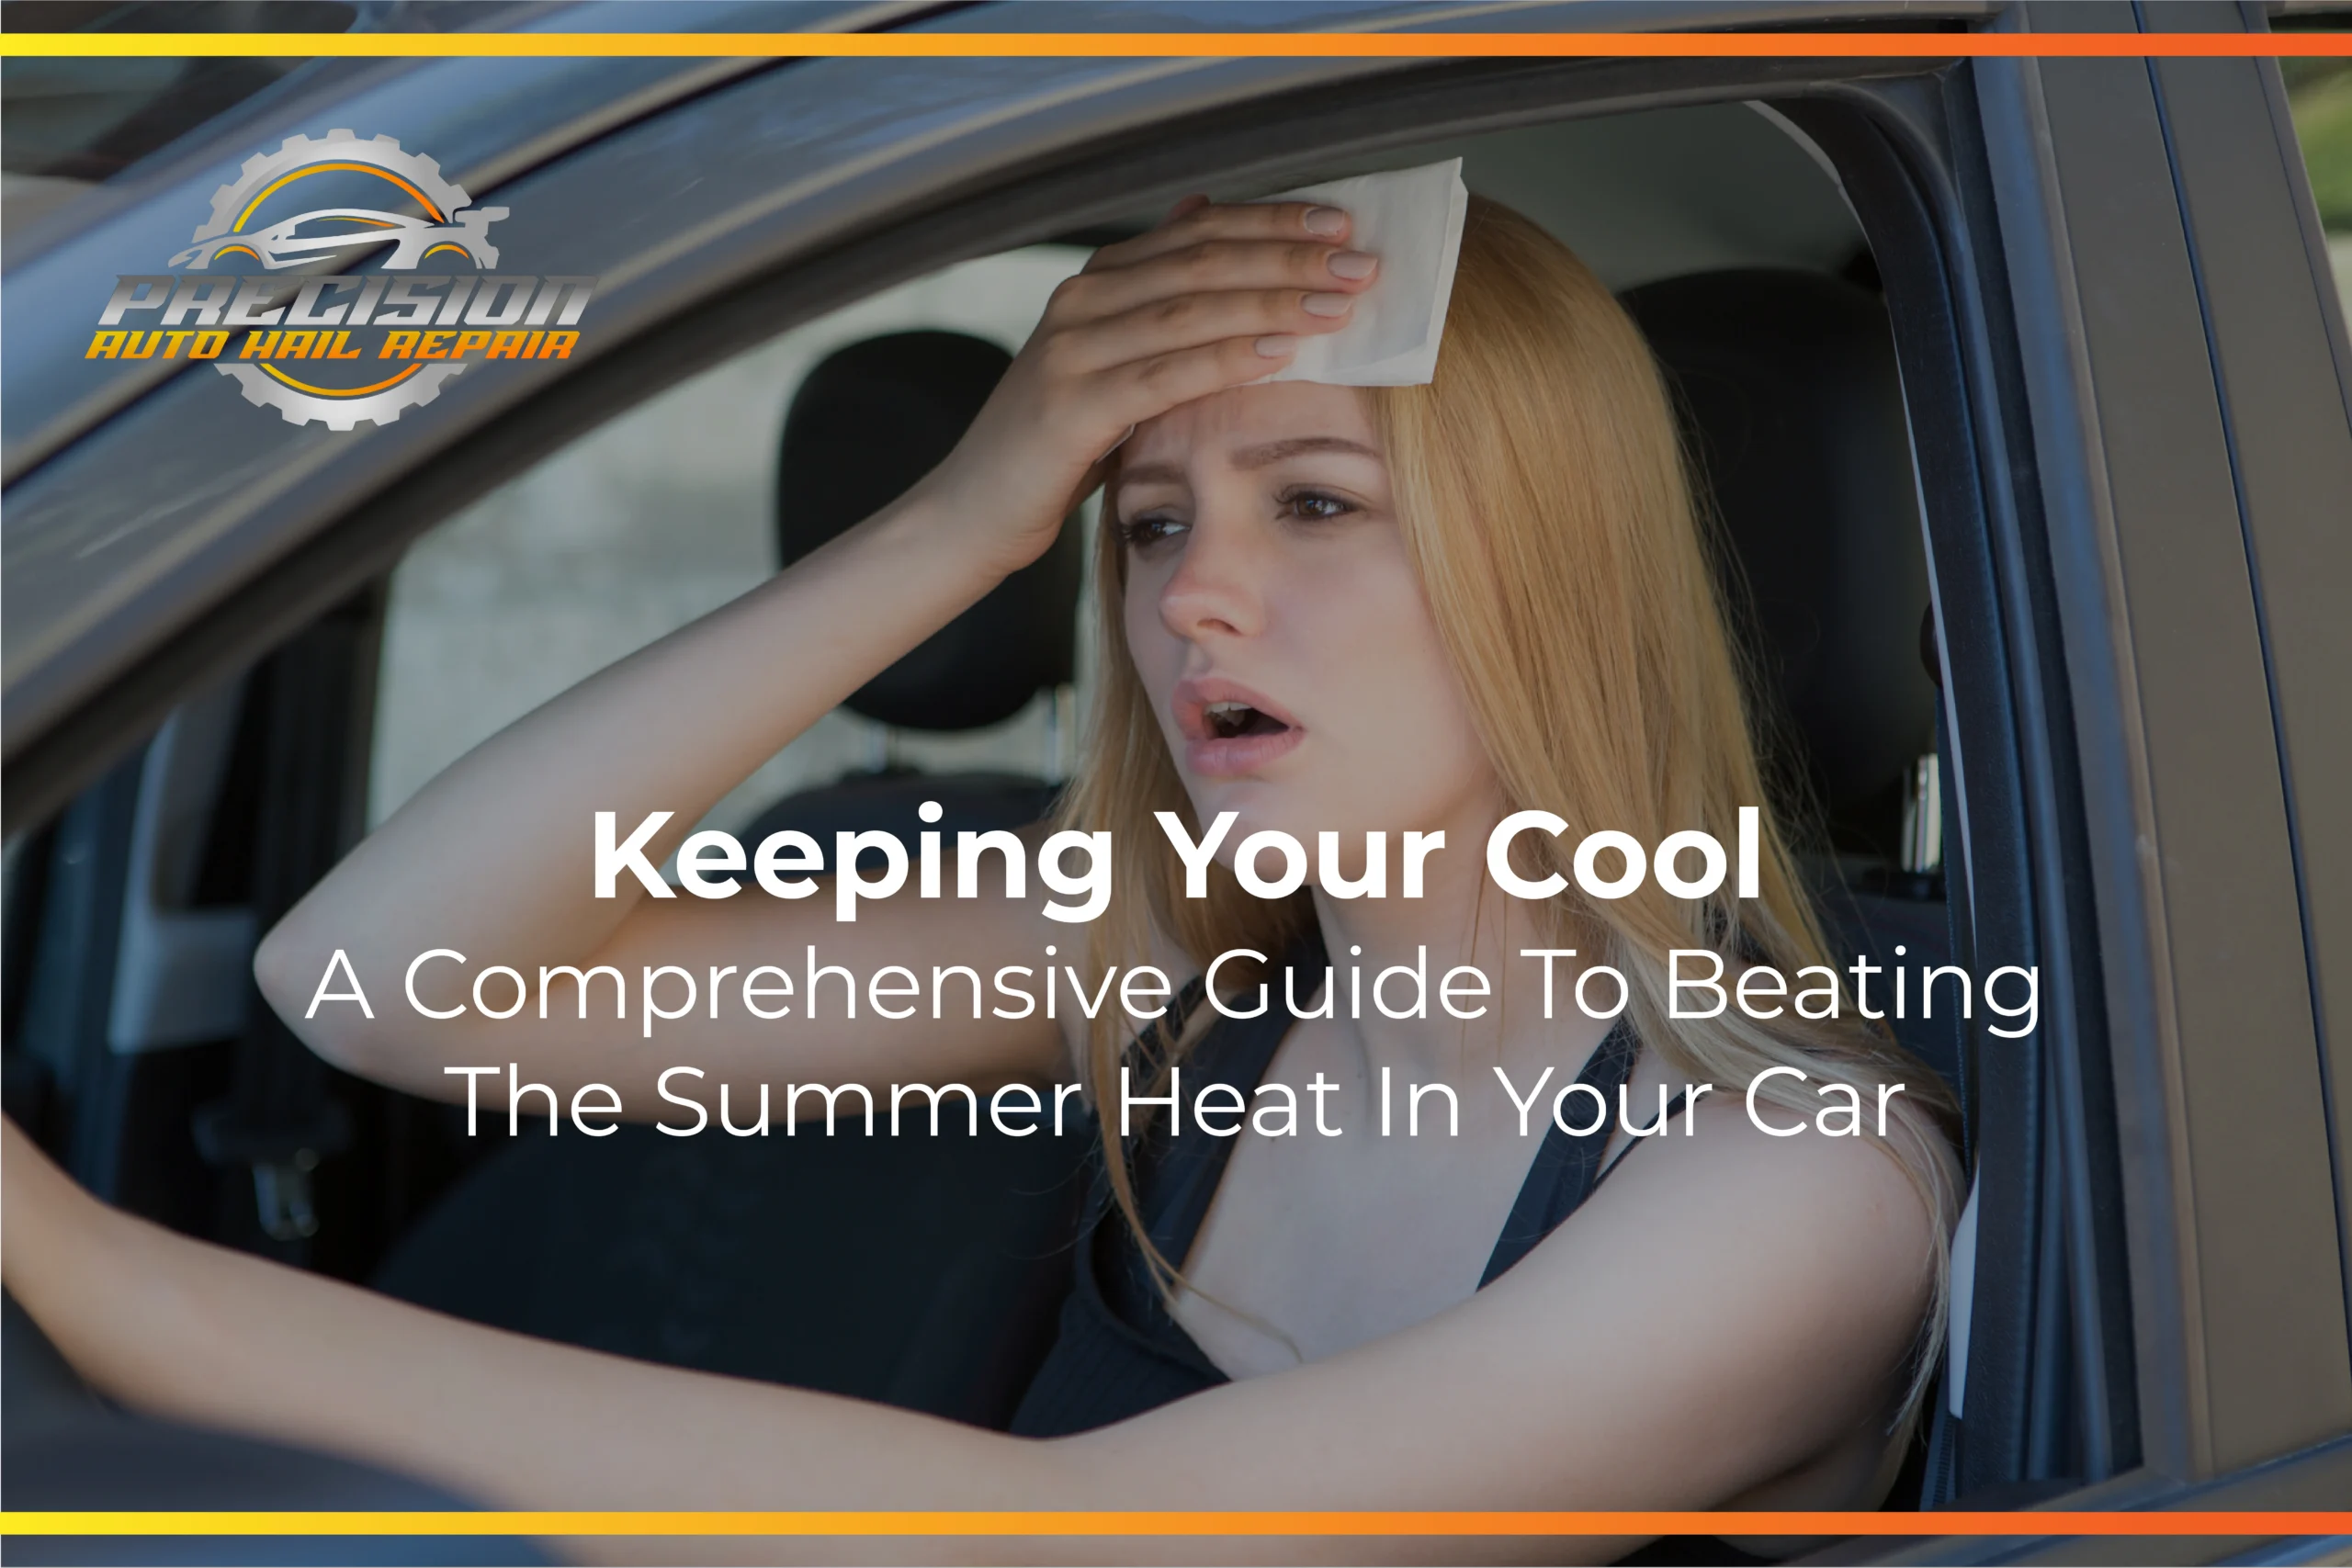 Guide to Beating the Summer Heat in Your Car